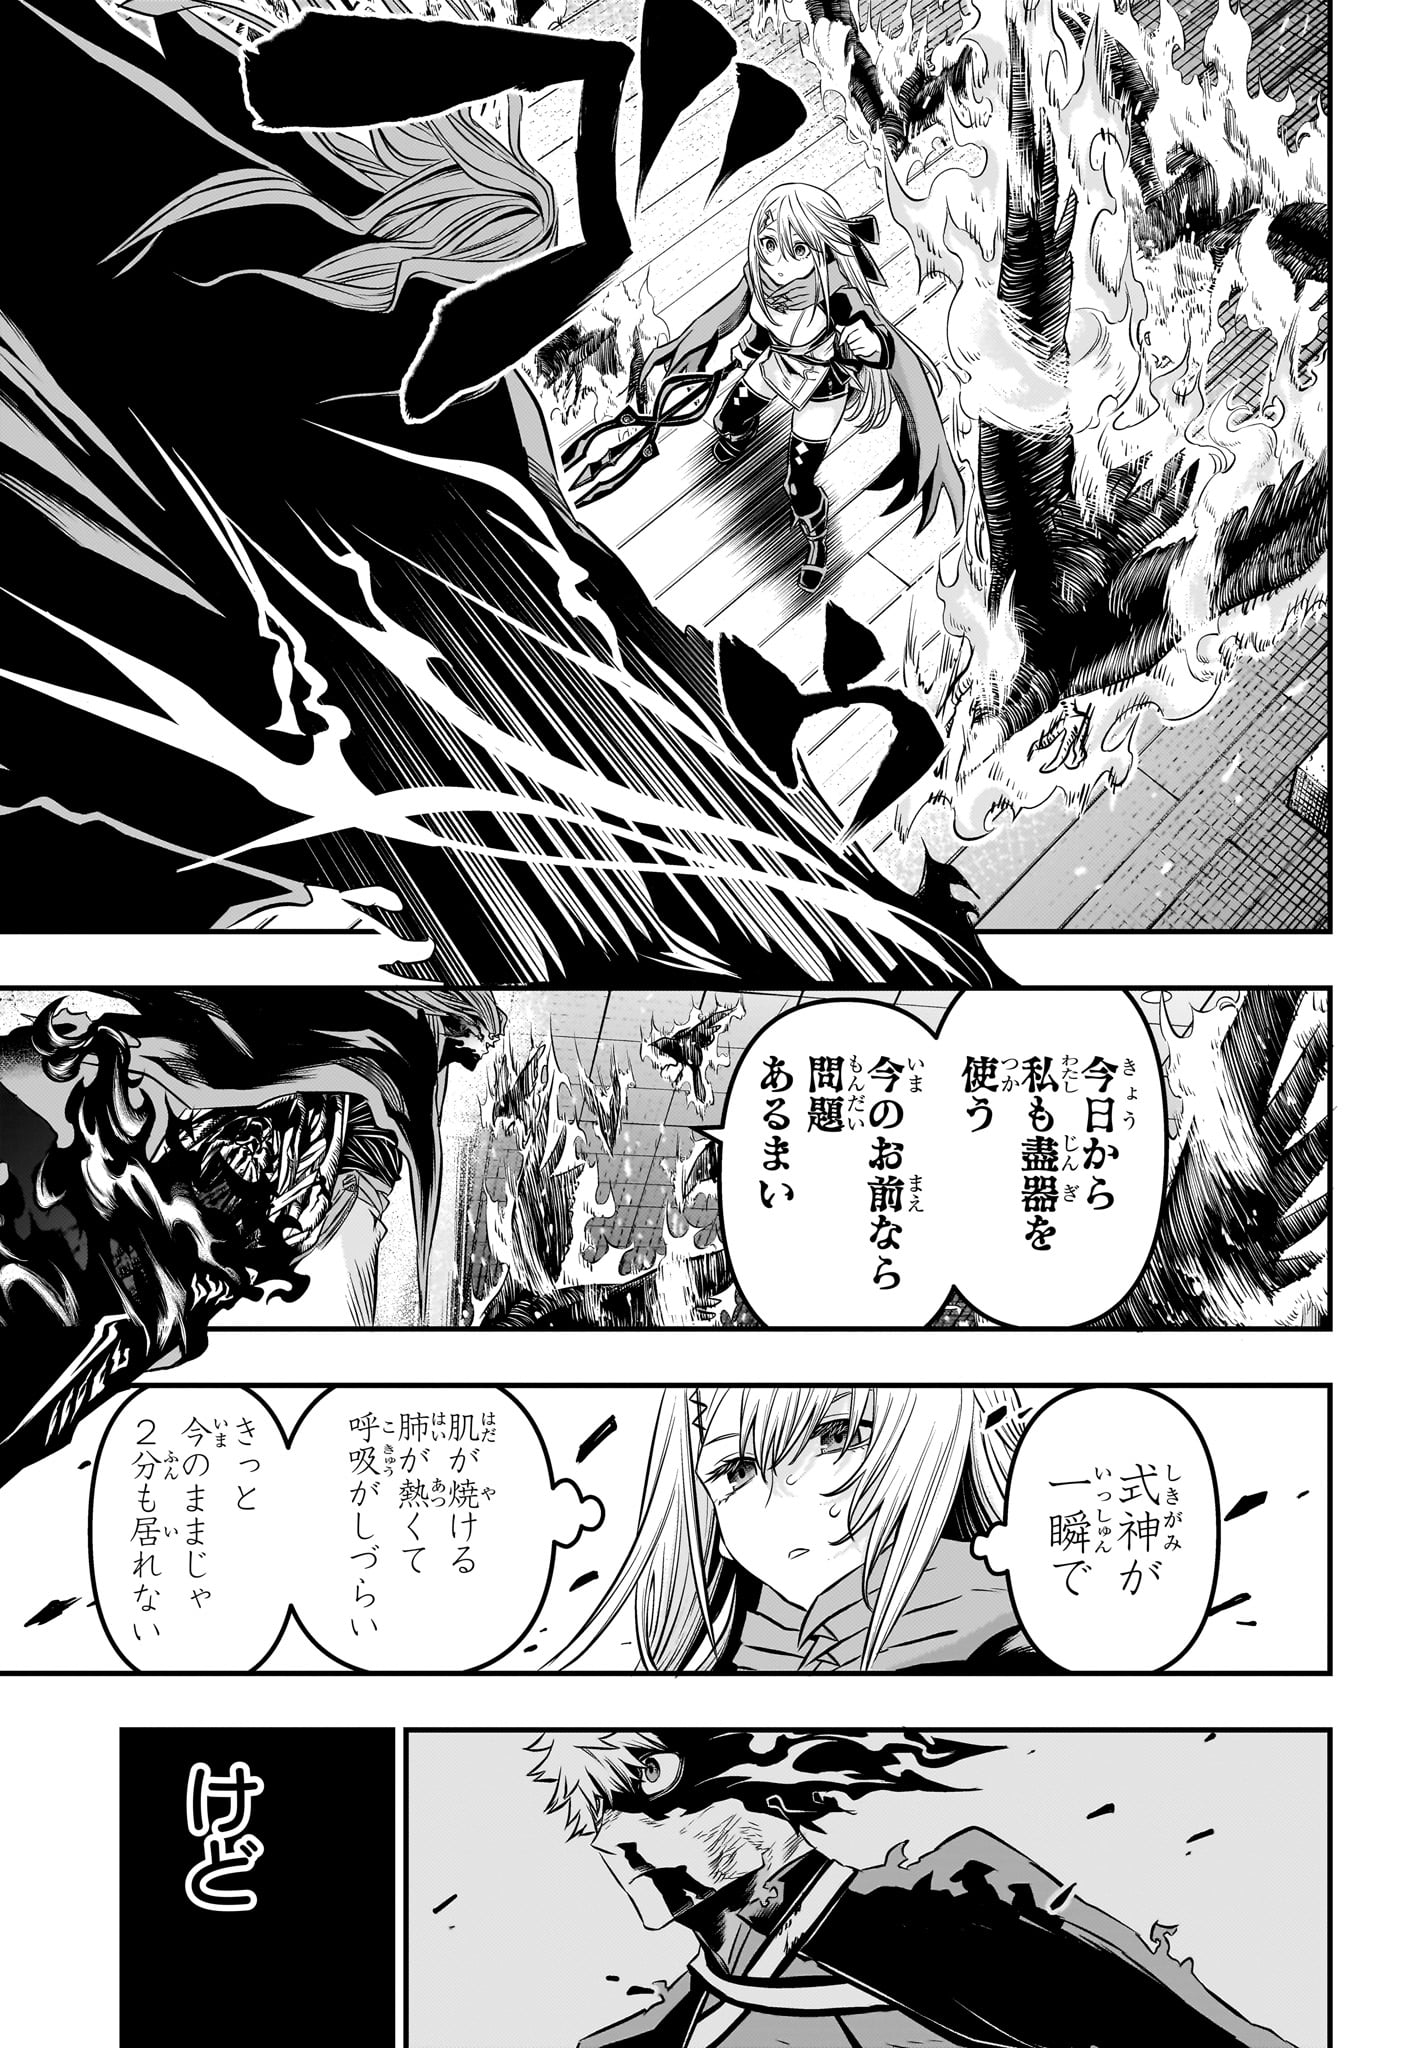 Nue no Onmyouji - Chapter 47 - Page 9